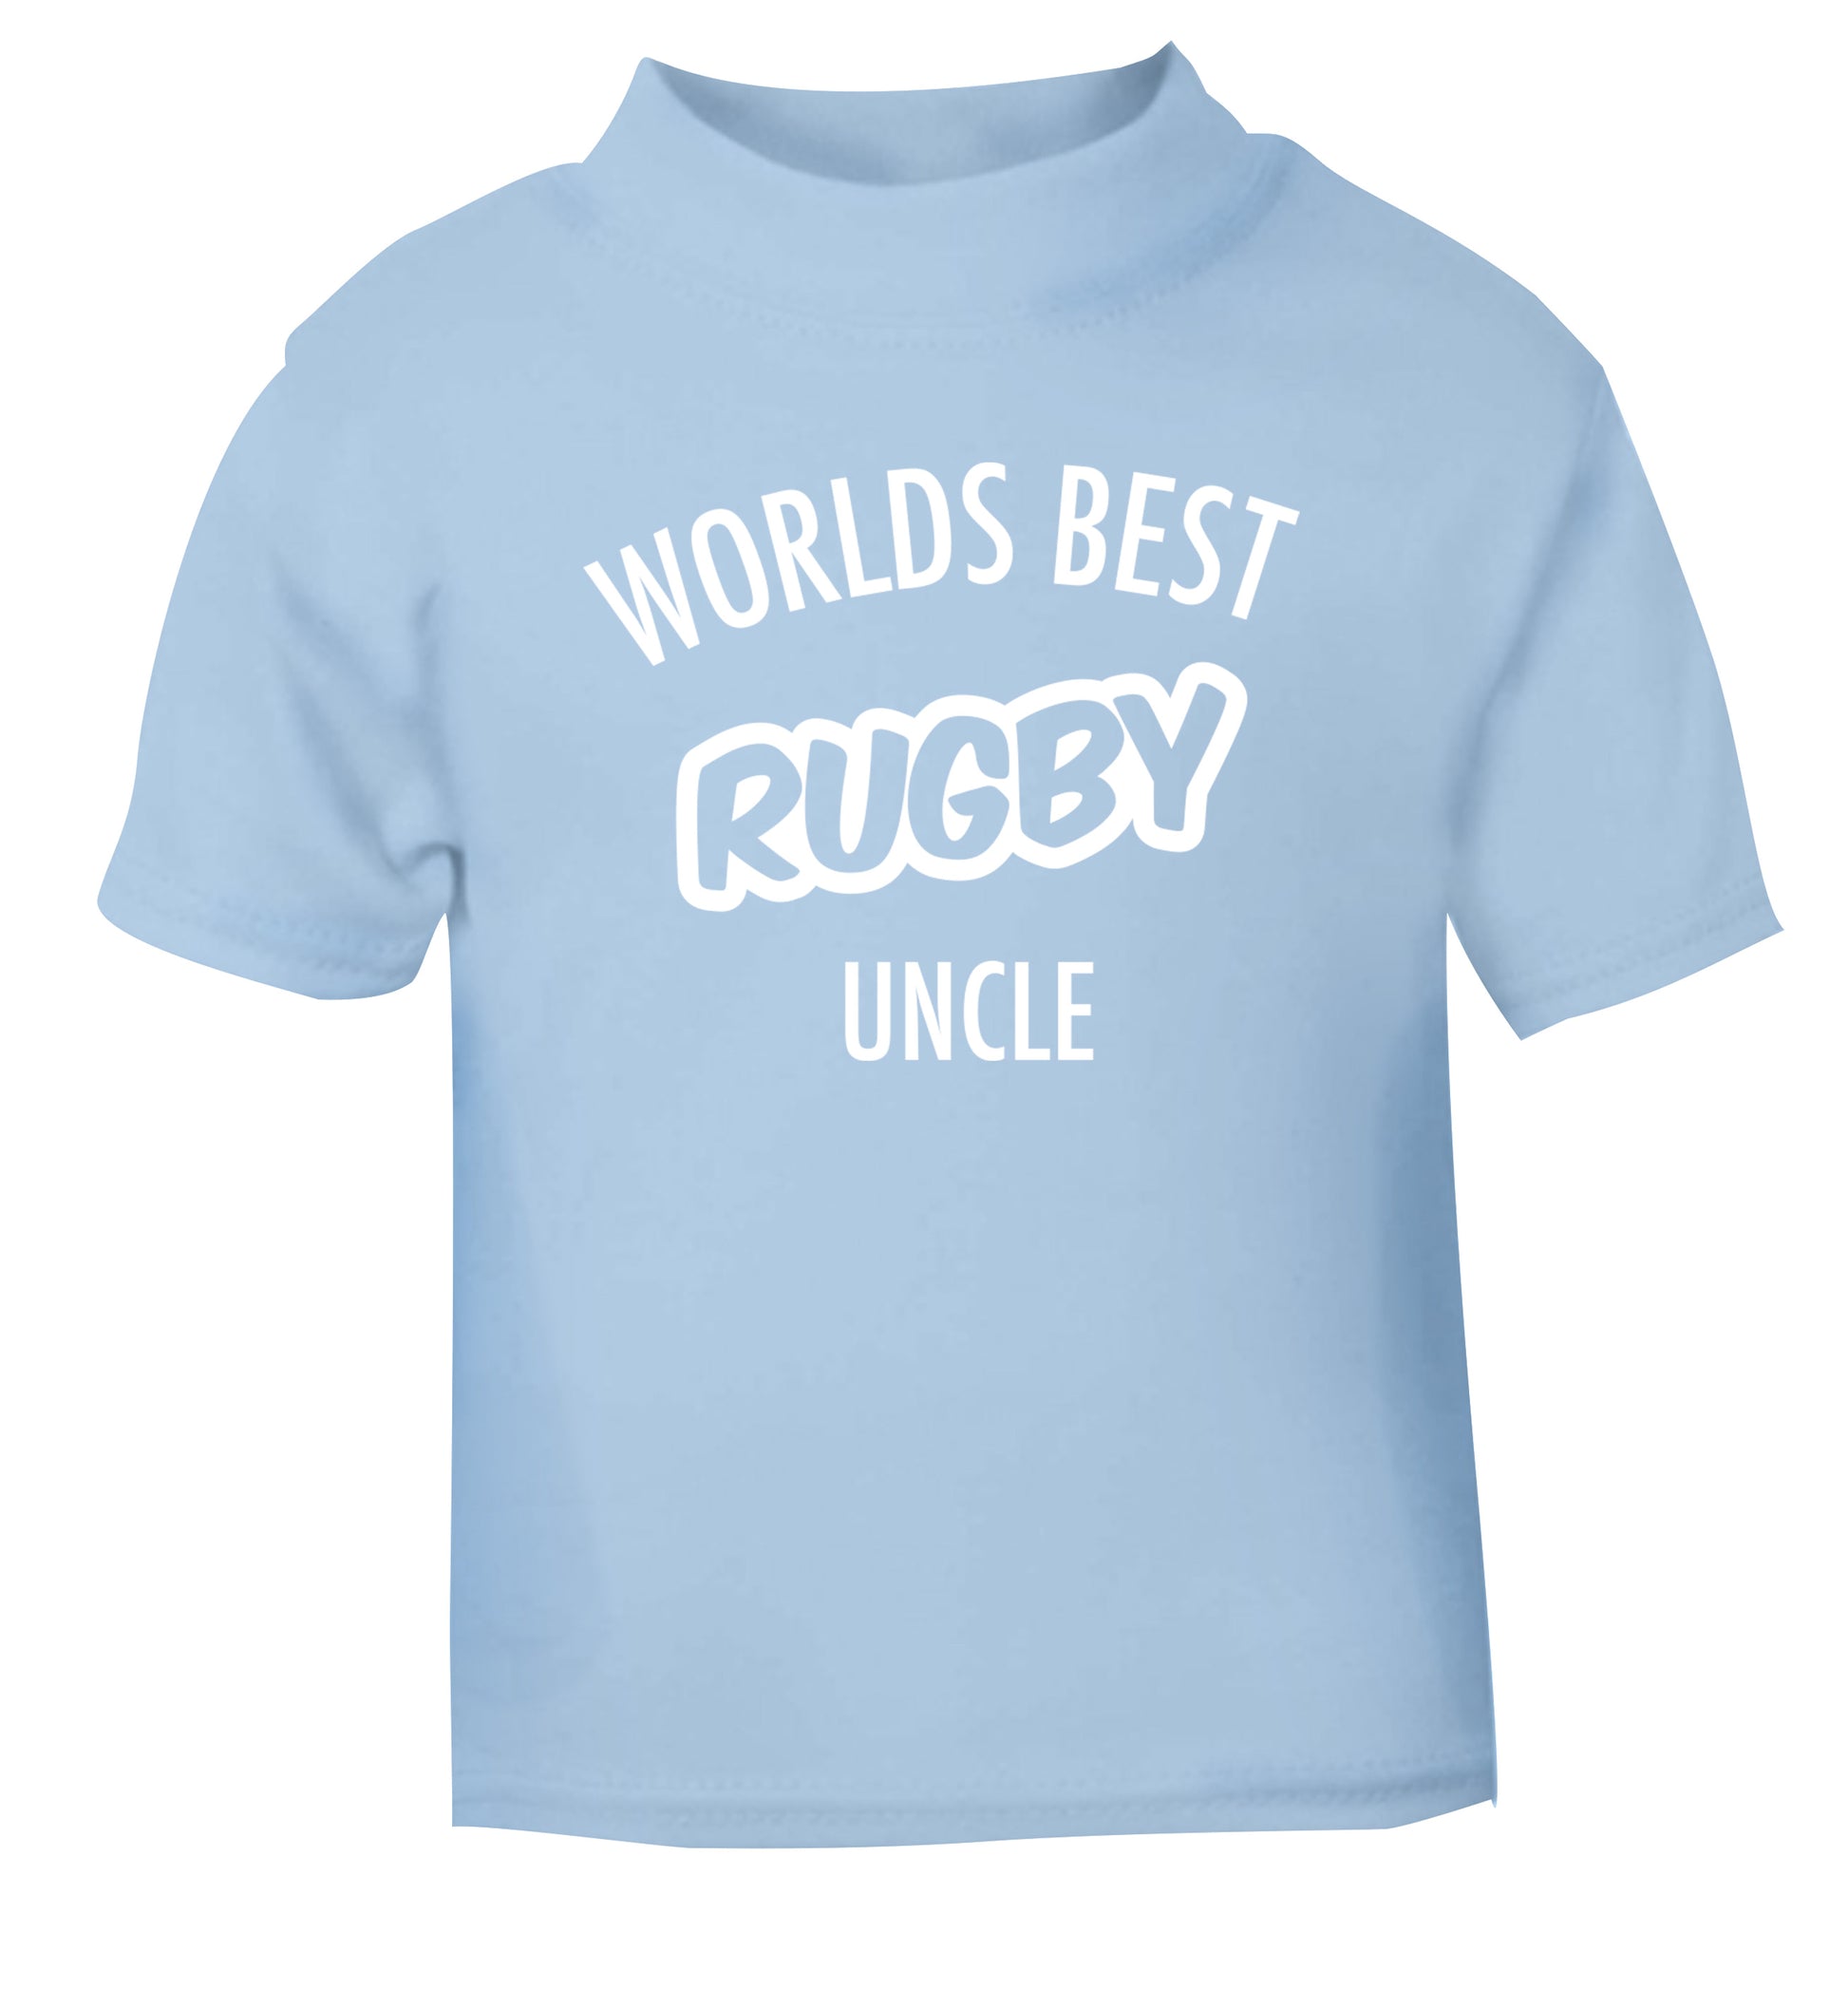 Worlds best rugby uncle light blue Baby Toddler Tshirt 2 Years